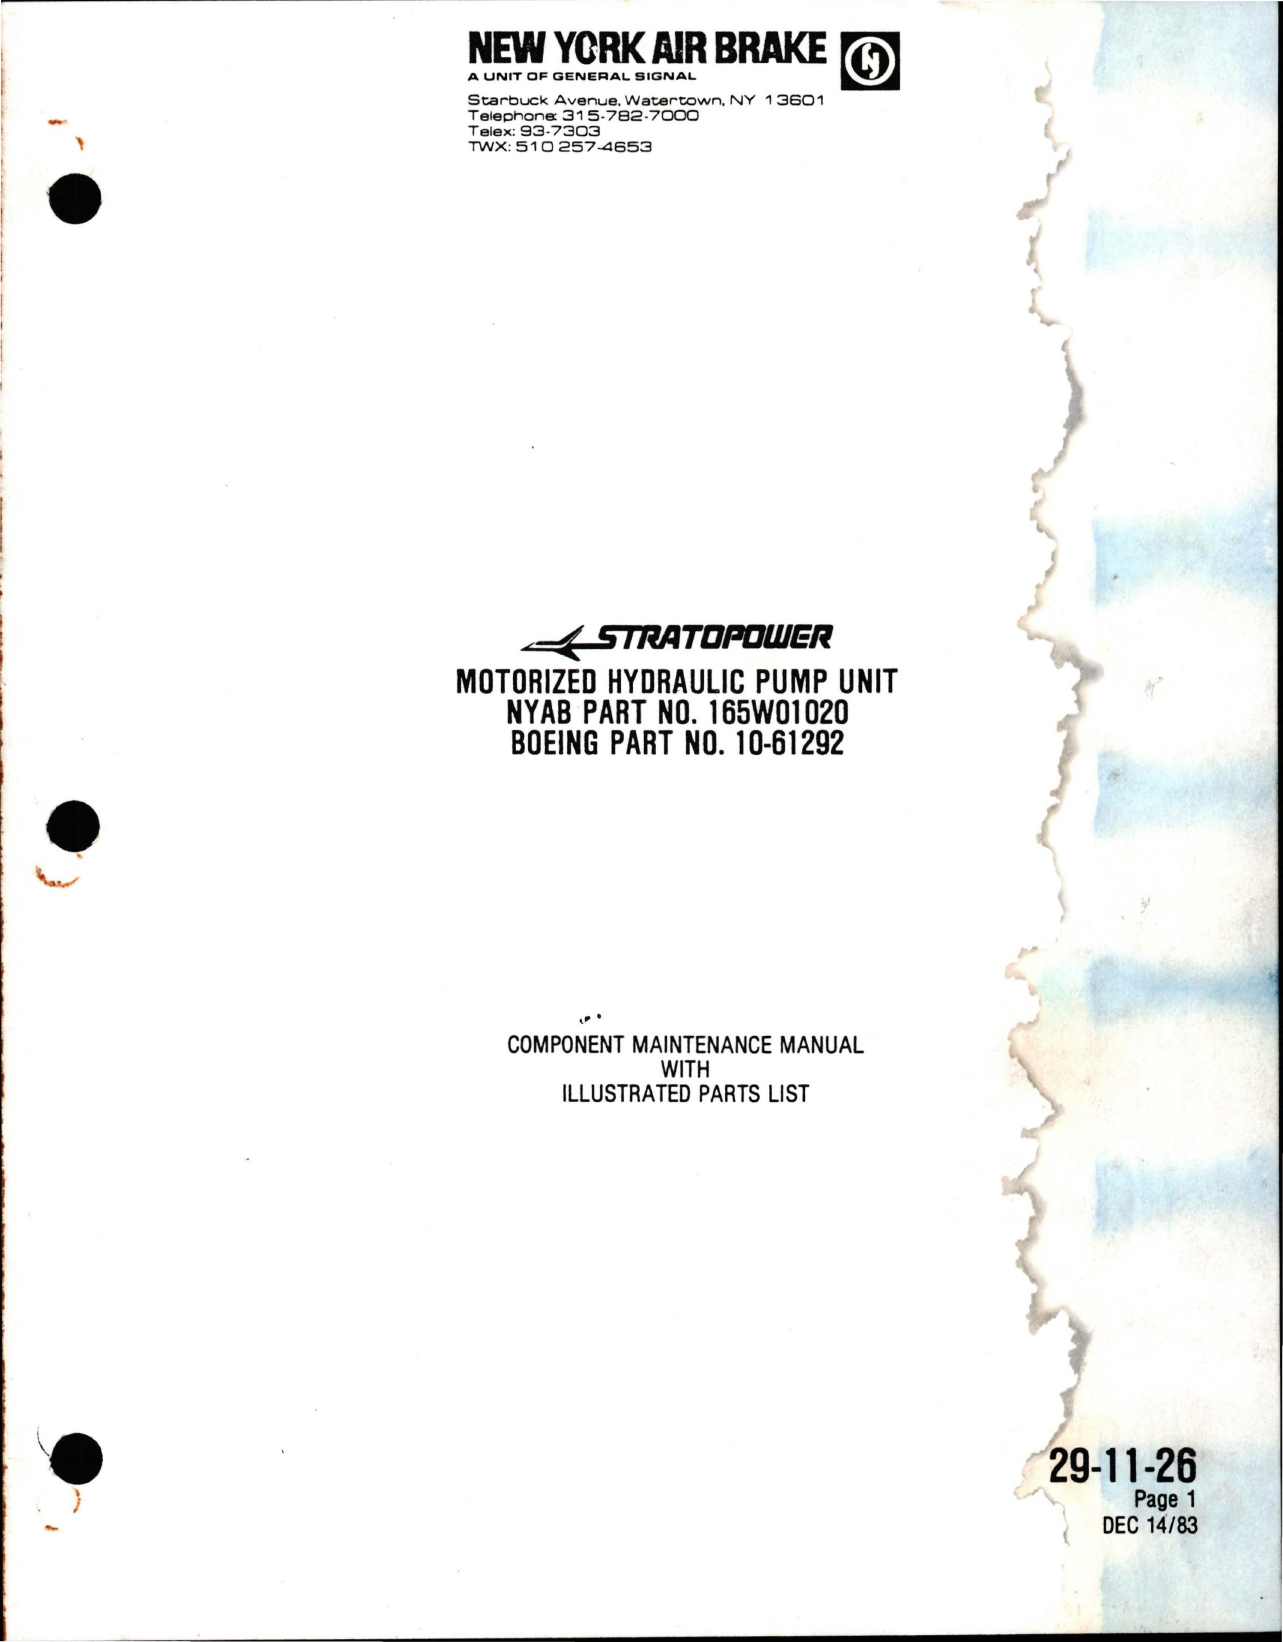 Sample page 1 from AirCorps Library document: Maintenance Manual with Illustrated Parts List for Motorized Hydraulic Pump Unit - NYAB Part 165W01020 - Boeing Part 10-61292